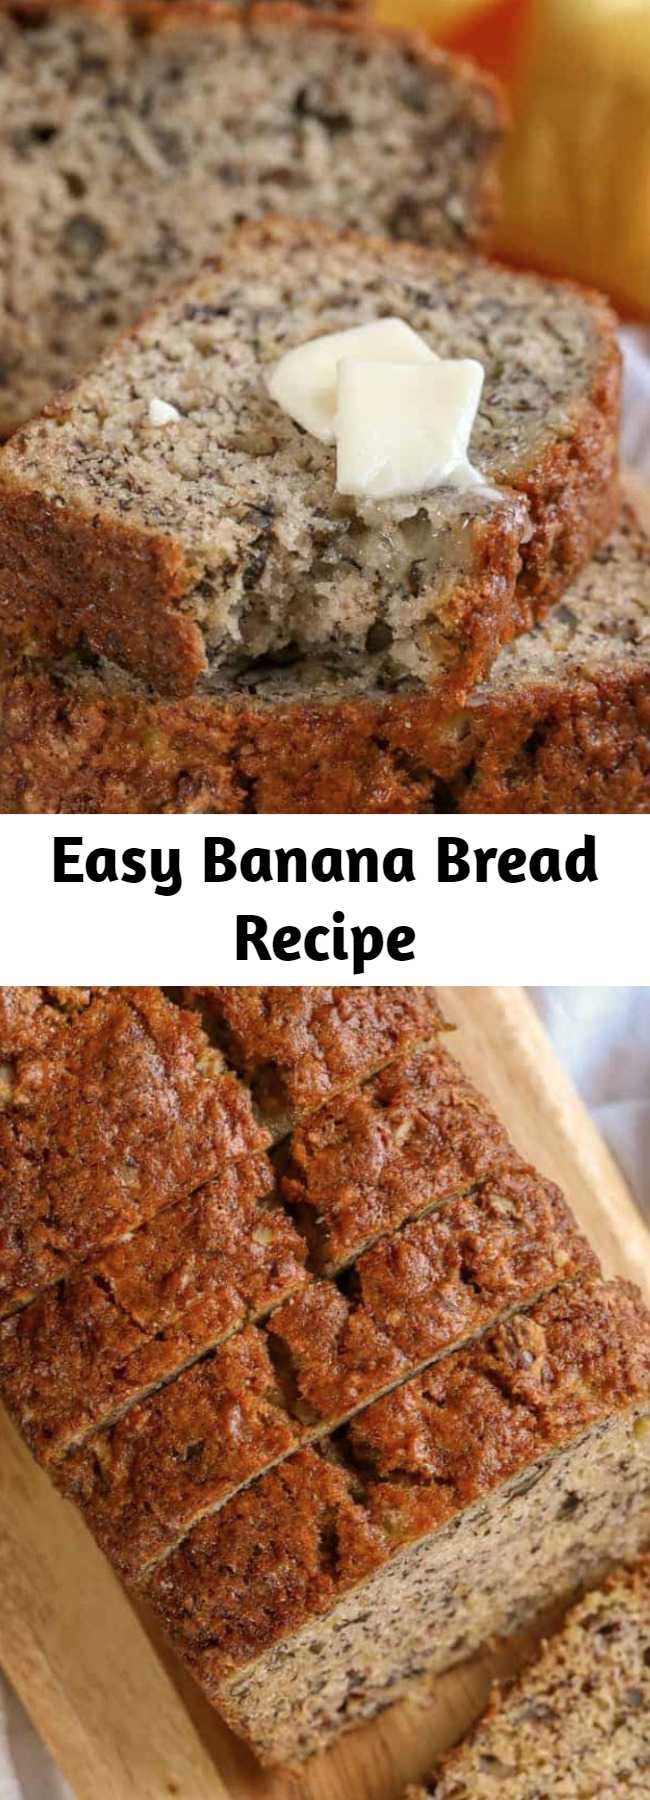 Easy Banana Bread Recipe - This banana bread is one of the easiest recipes I’ve ever tried and turns out perfectly every time! Feel free to substitute your favorite nuts (like walnuts) or even add in chocolate chips.